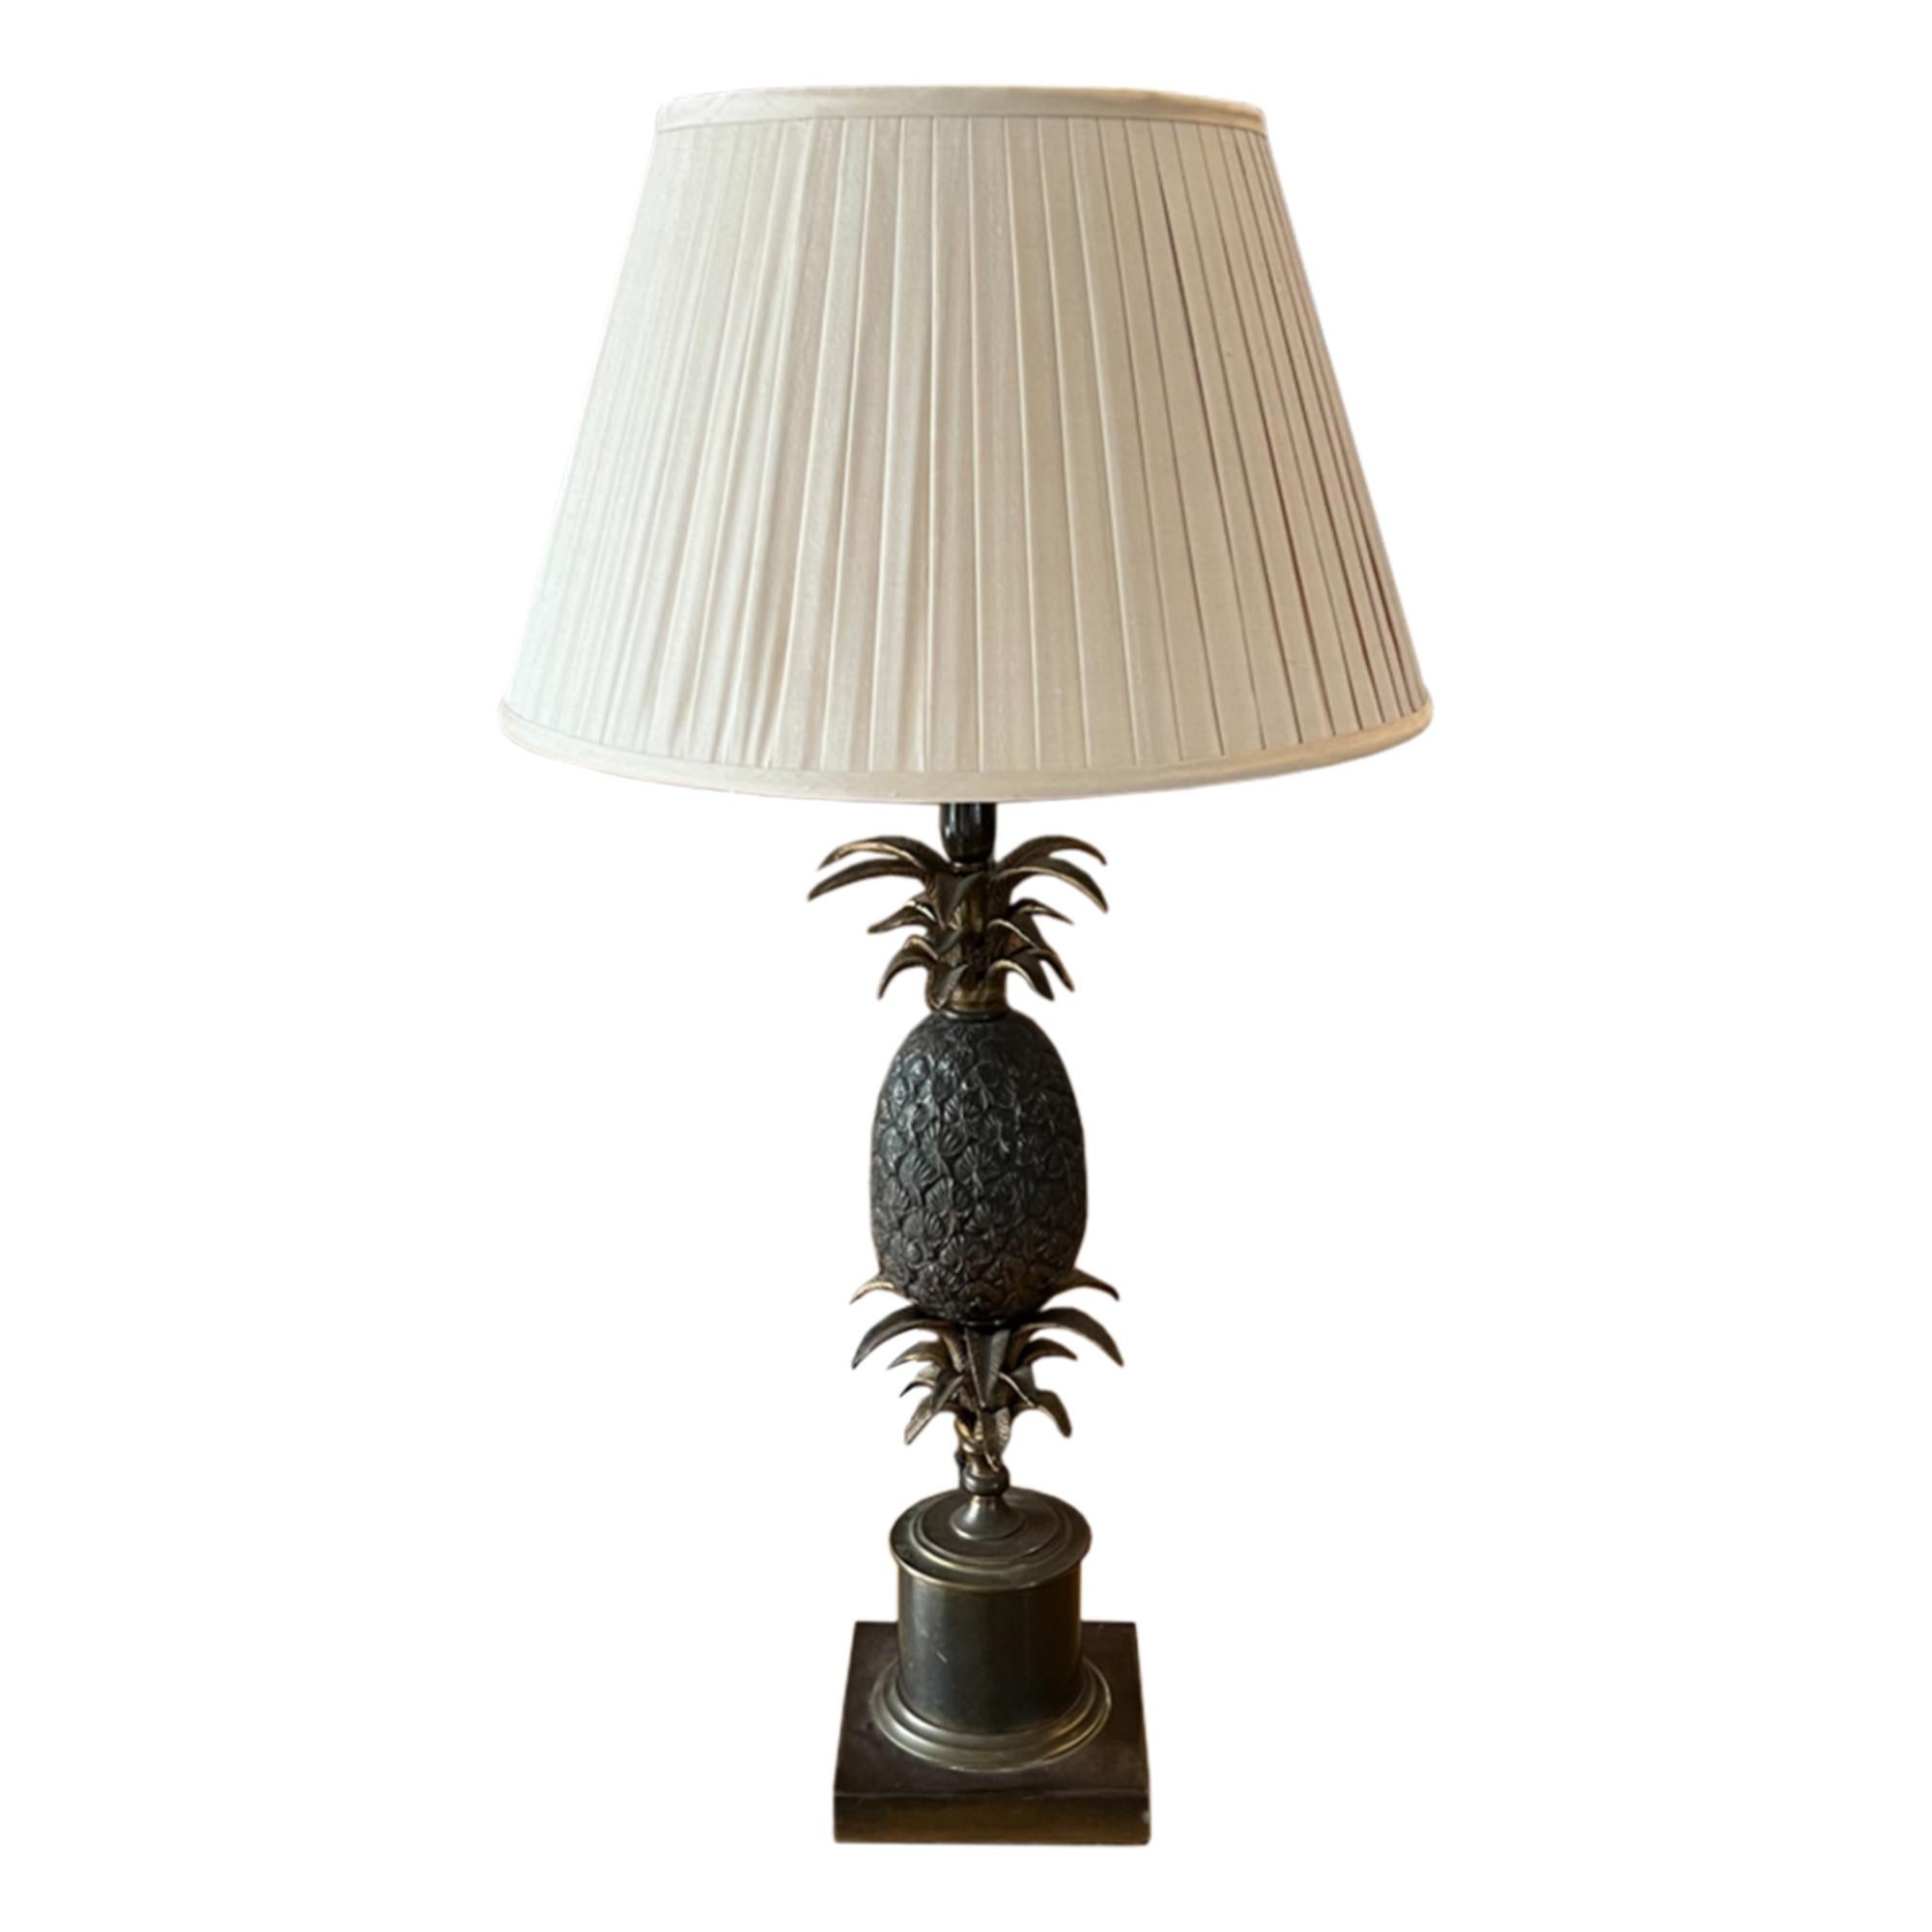 Mid-20th Century French 1960s Pineapple Table Lamp For Sale